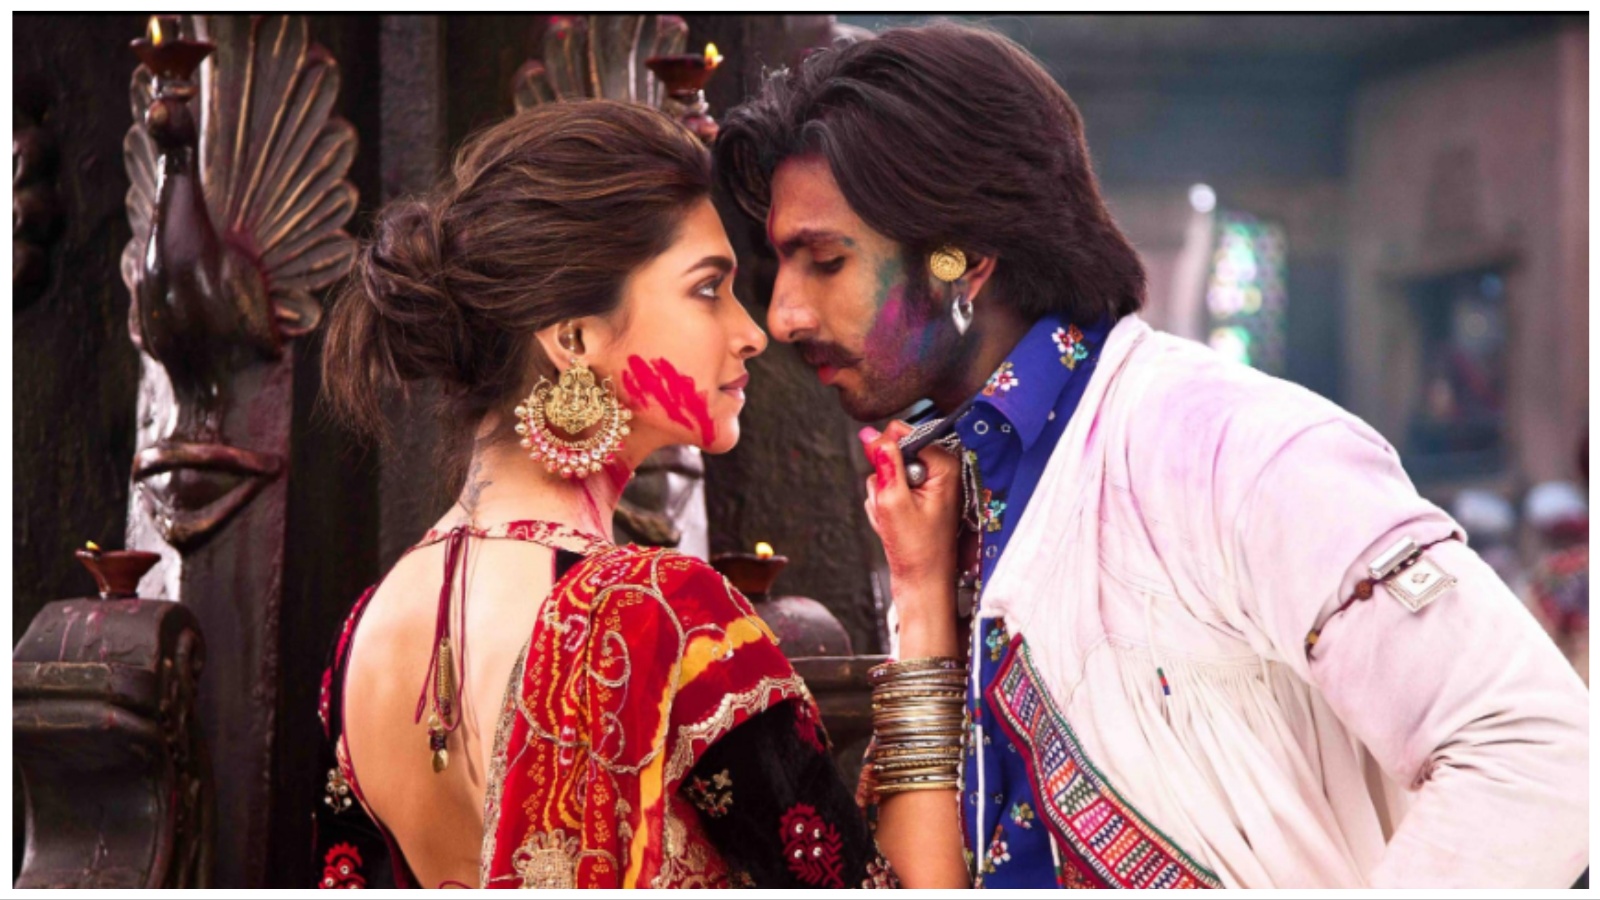 Gulshan Devaiah recalls witnessing Ranveer Singh and Deepika Padukone’s chemistry on sets of Ram-Leela: ‘He was really serious about her but…’ | Bollywood News